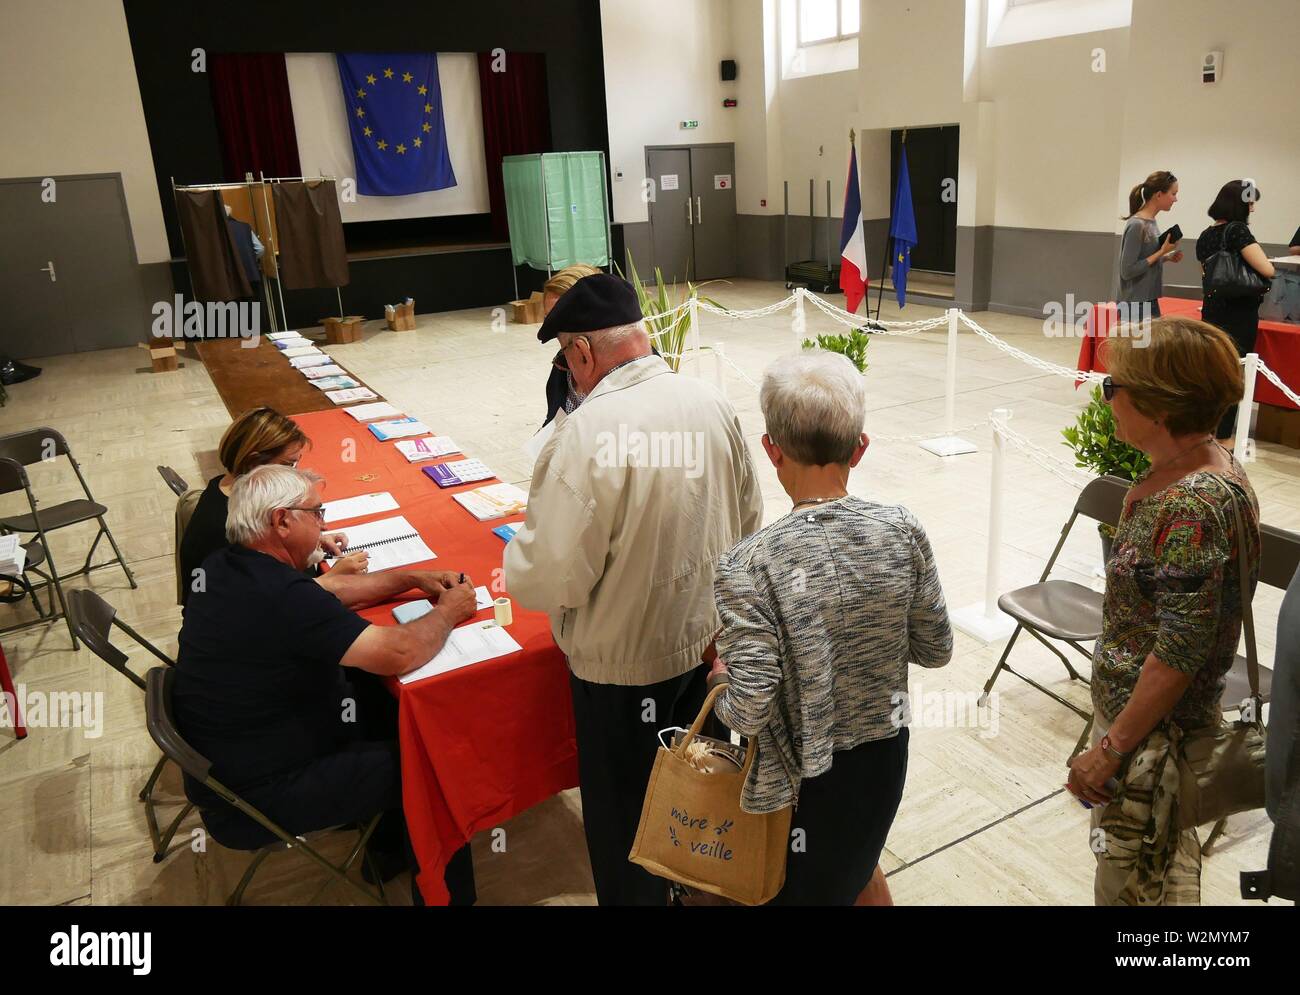 Voting in France in the 2019 European Union elections Stock Photo